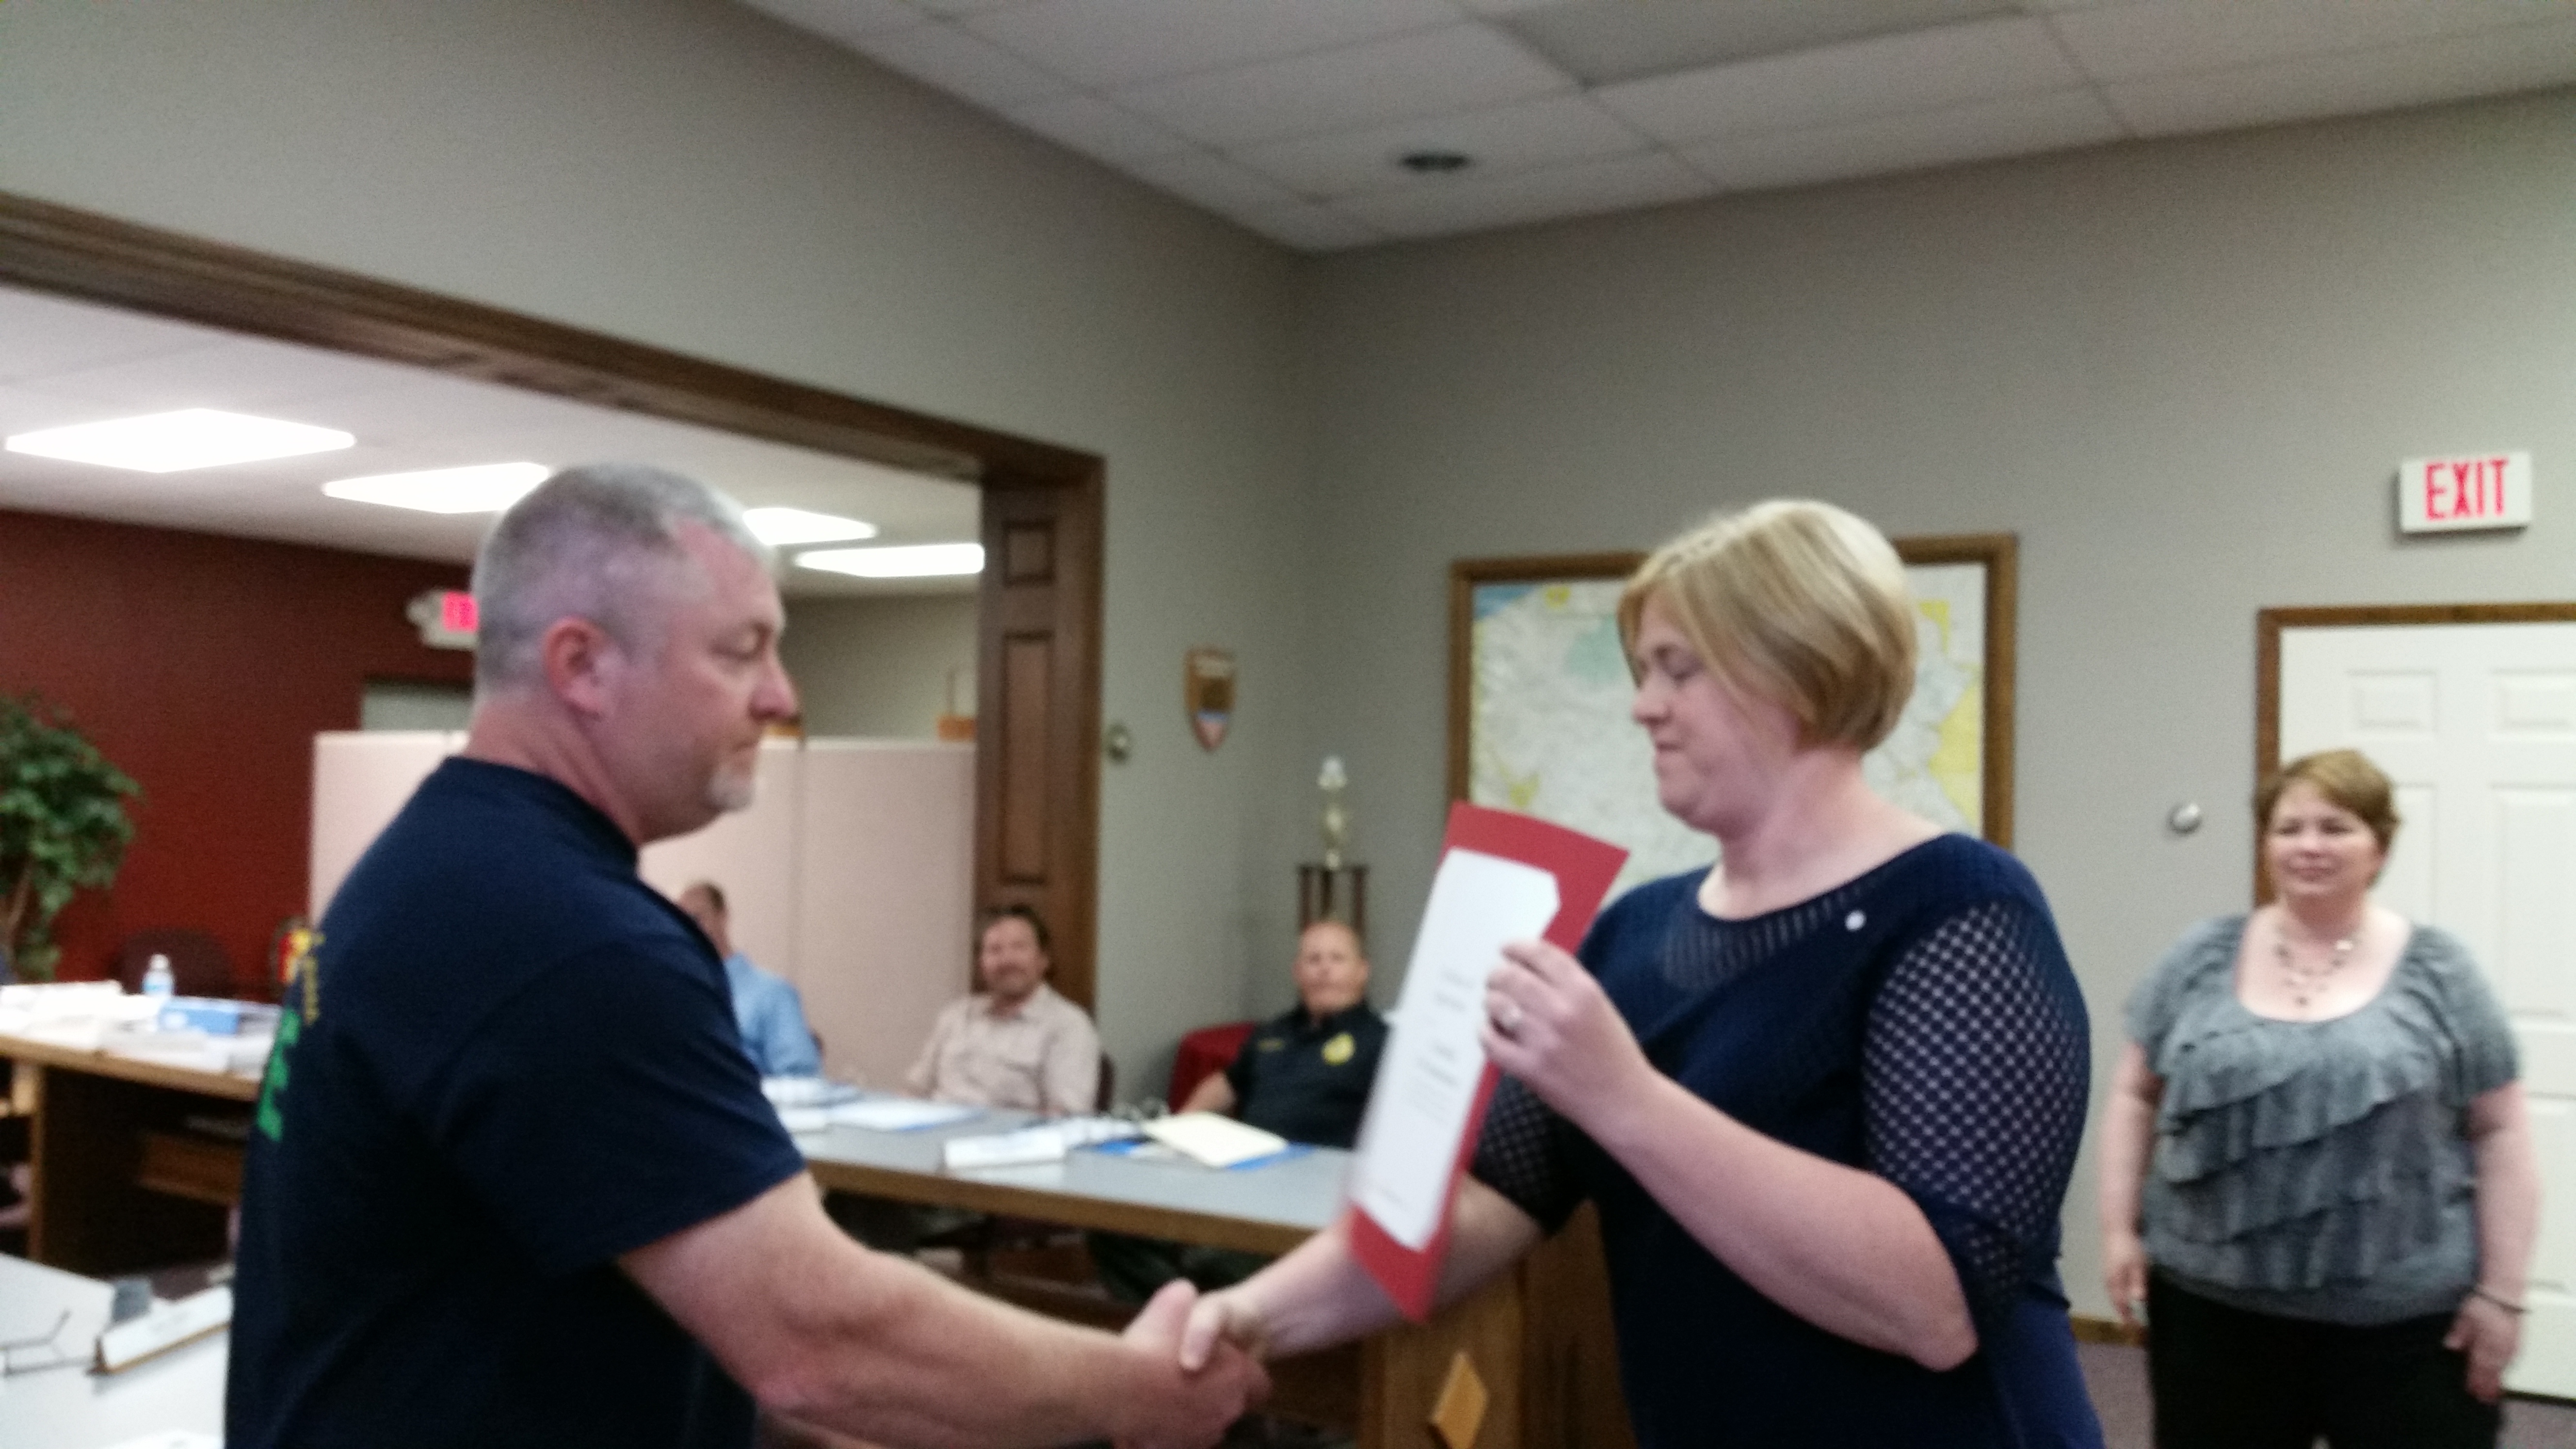 Clearfield Borough Fire Chief Todd Kling, left, accepts a certification of appreciation from Beth Sawyer ,center, of the American Cross. Sawyer also presented a certificate to Borough Operations Manager Leslie Stott, right. The fire department and the borough worked with the Red Cross April 28 to install 541 smoke detectors in 135 homes. (Photo by Kimberly Finnigan)